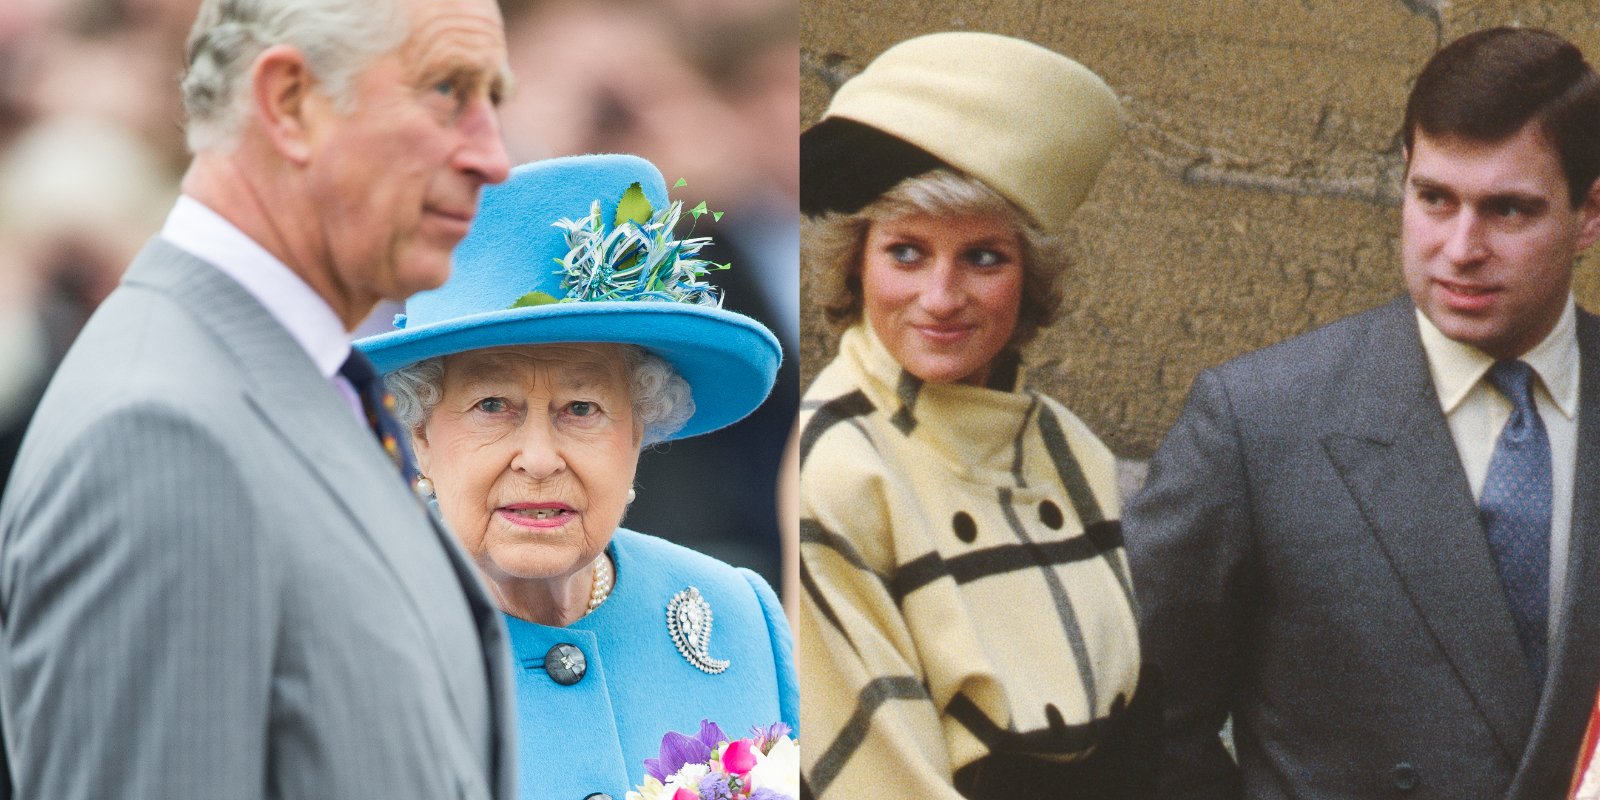 Prince Charles, Queen Elizabeth, Princess Diana and Prince Andrew in side by side photographs.